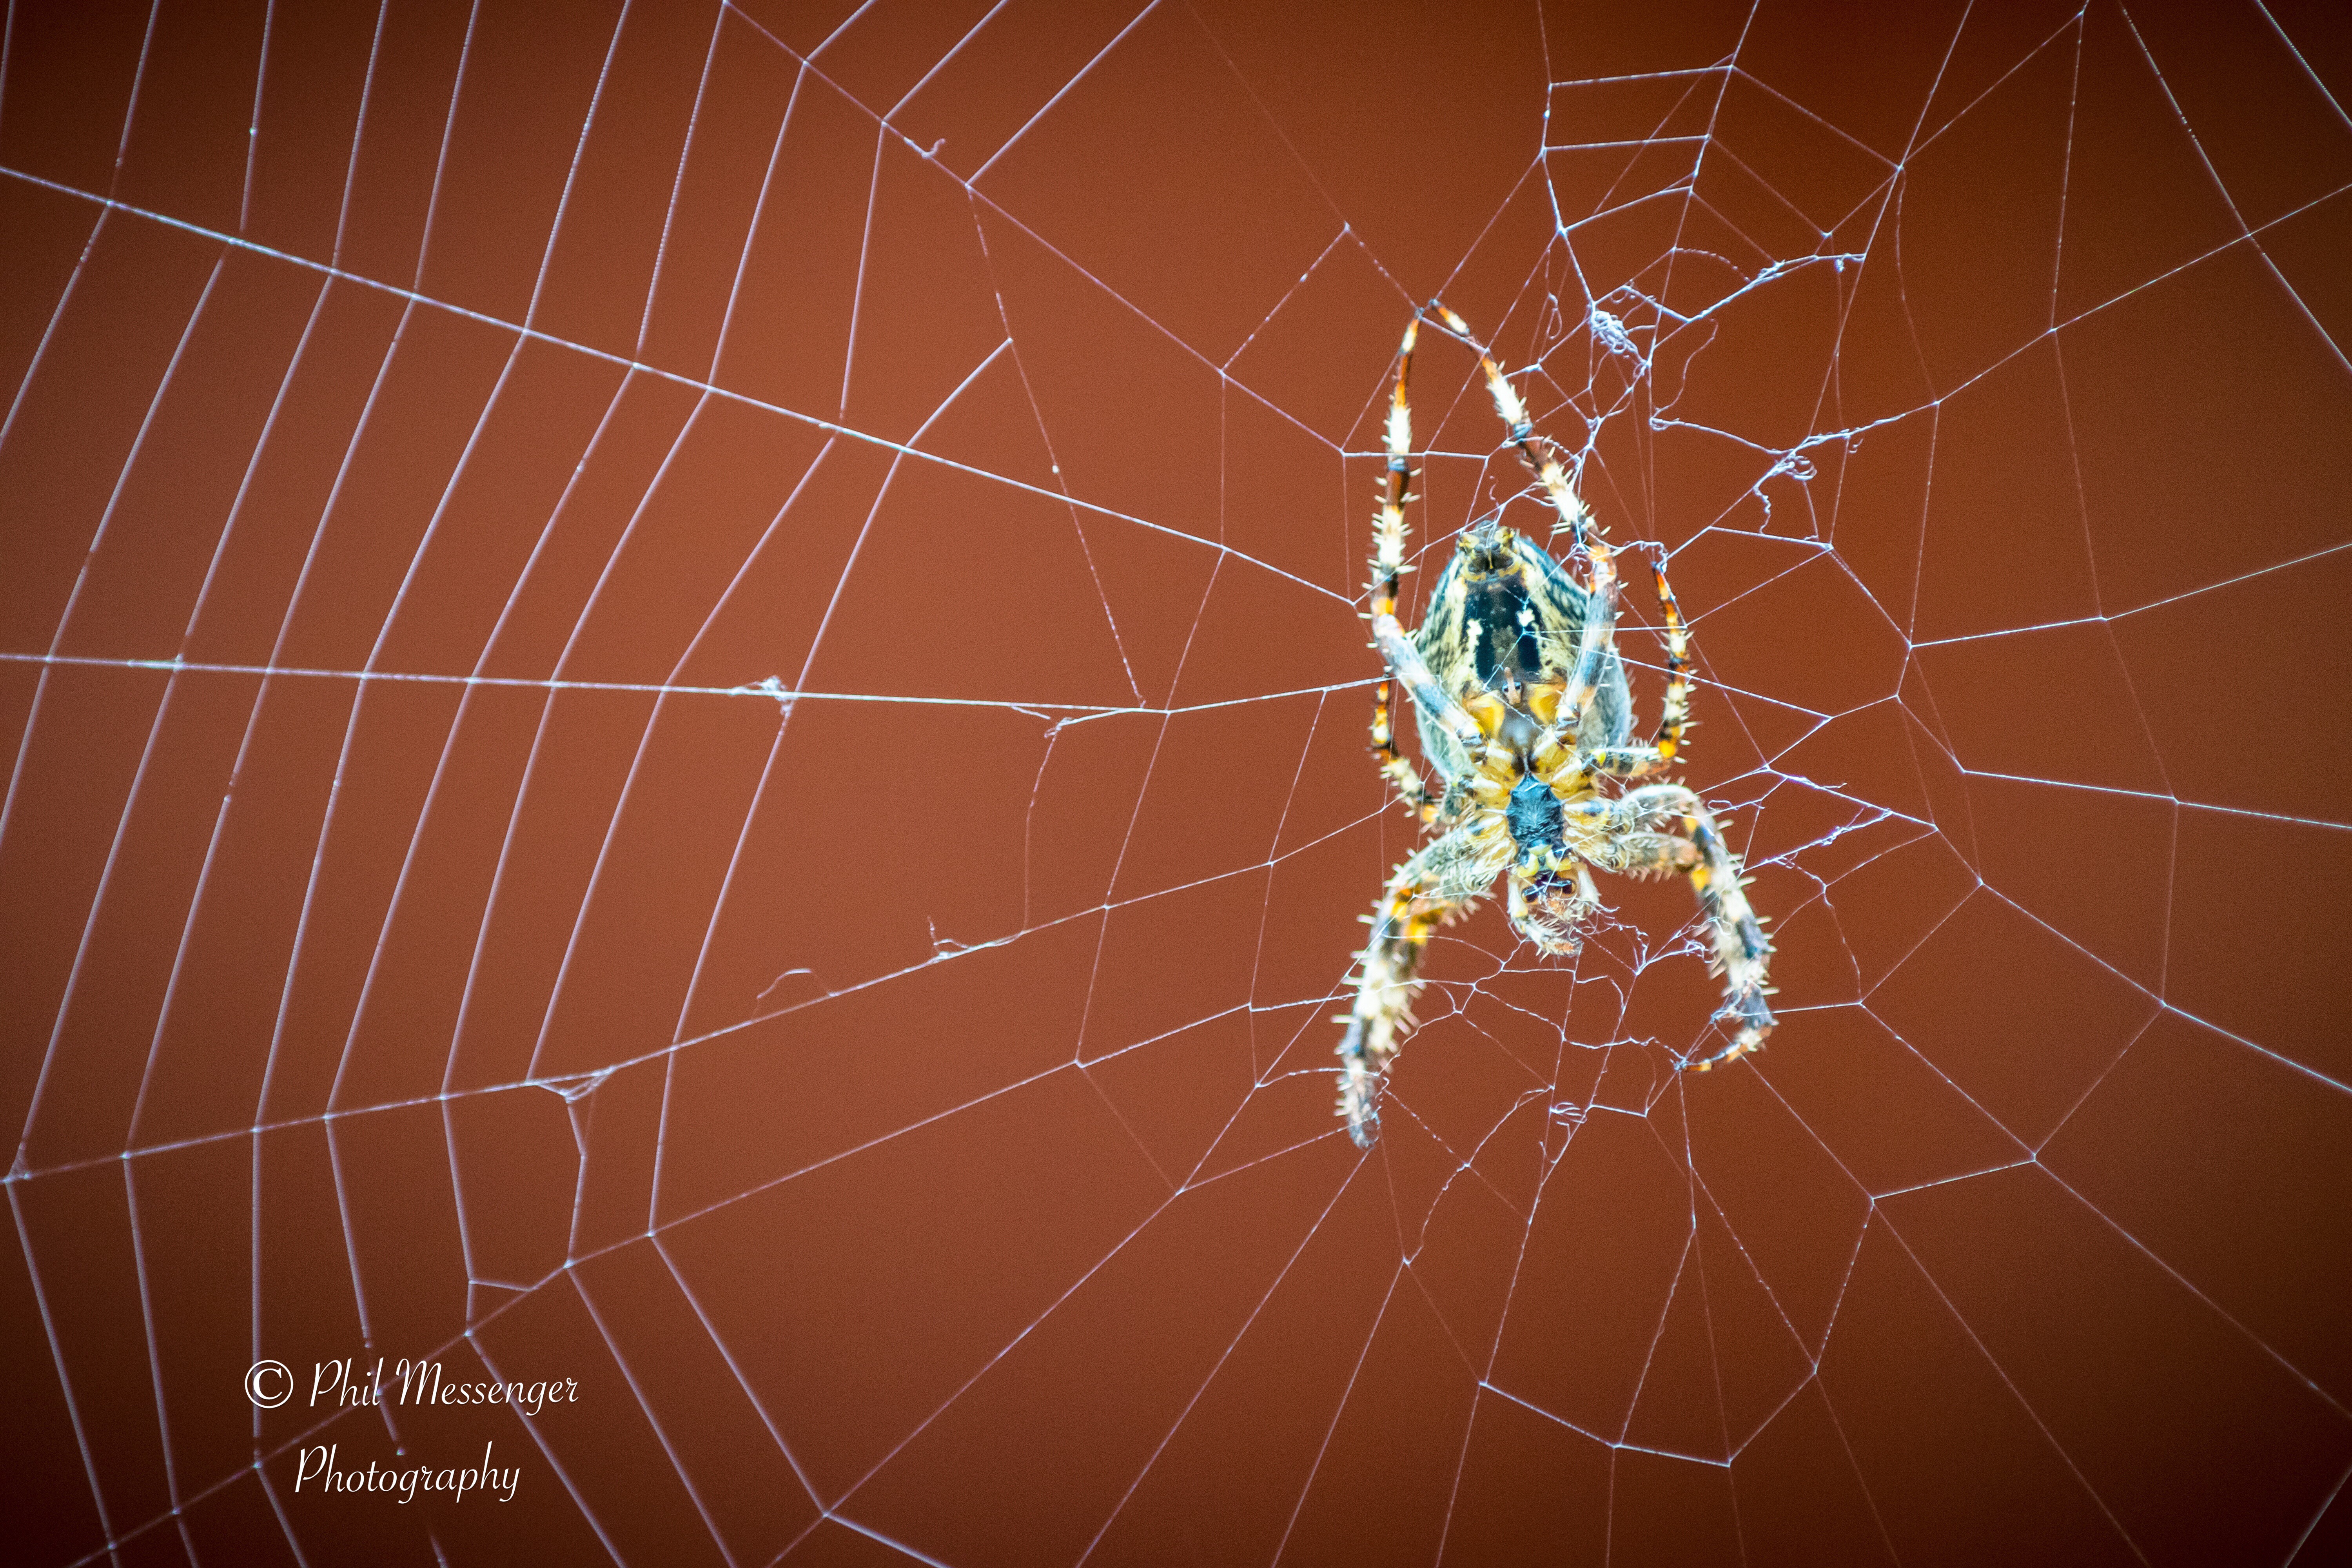 Found this little Garden Spider on a cobweb by my garden shed, Swindon, Wiltshire. Probably not everyoneâ€™s cup of tea ðŸ˜‰